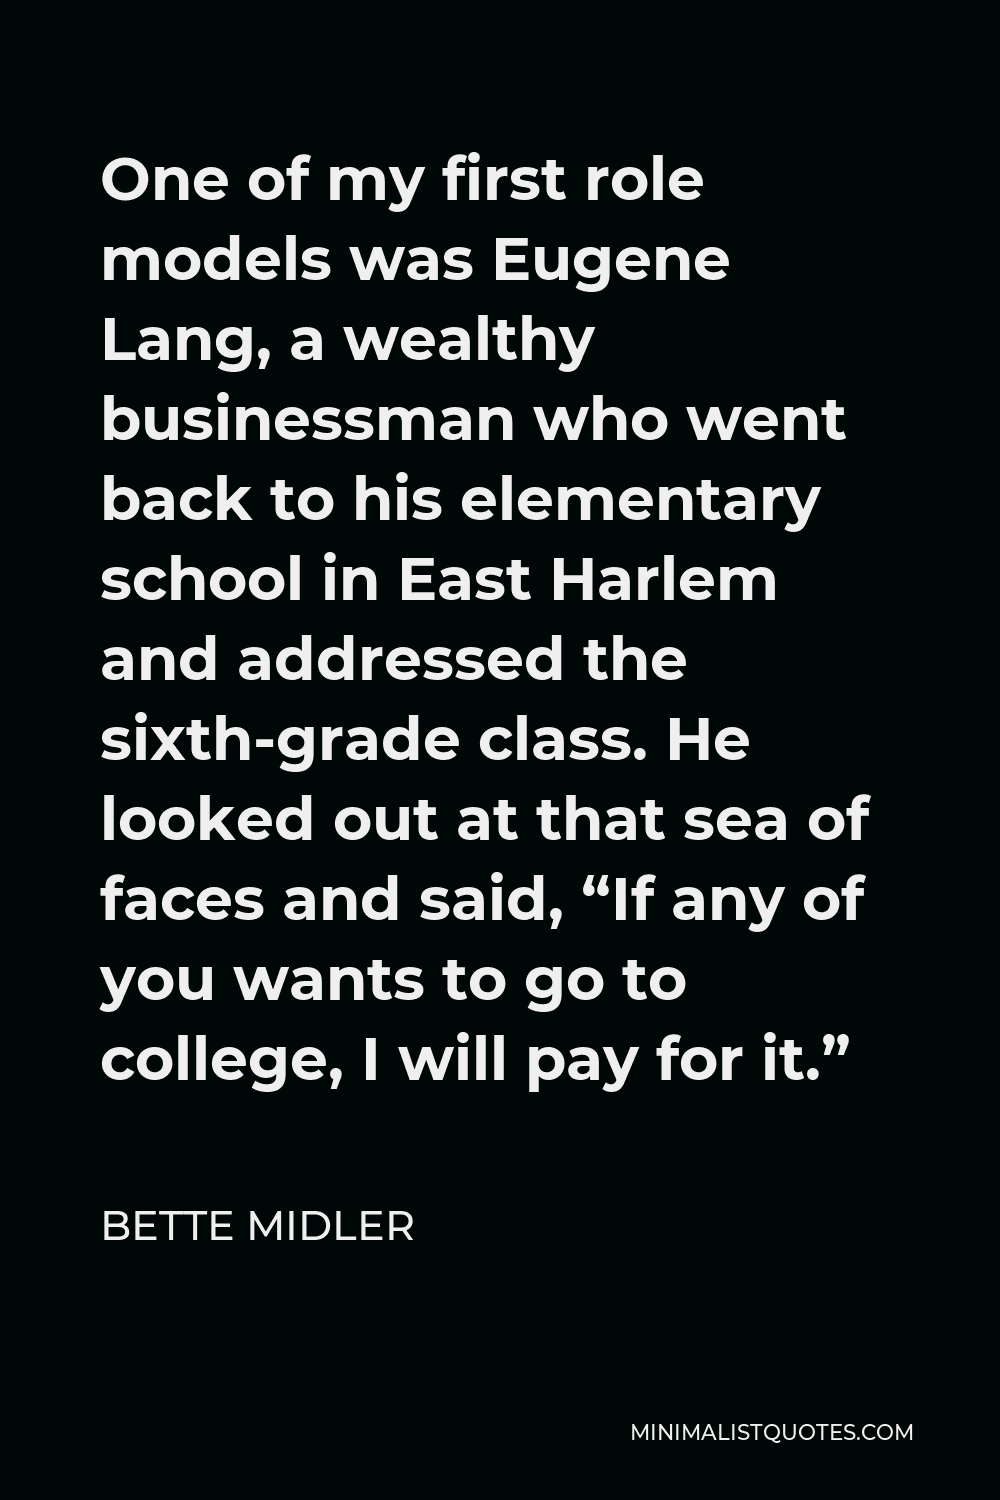 Bette Midler Quote - One of my first role models was Eugene Lang, a wealthy businessman who went back to his elementary school in East Harlem and addressed the sixth-grade class. He looked out at that sea of faces and said, “If any of you wants to go to college, I will pay for it.”